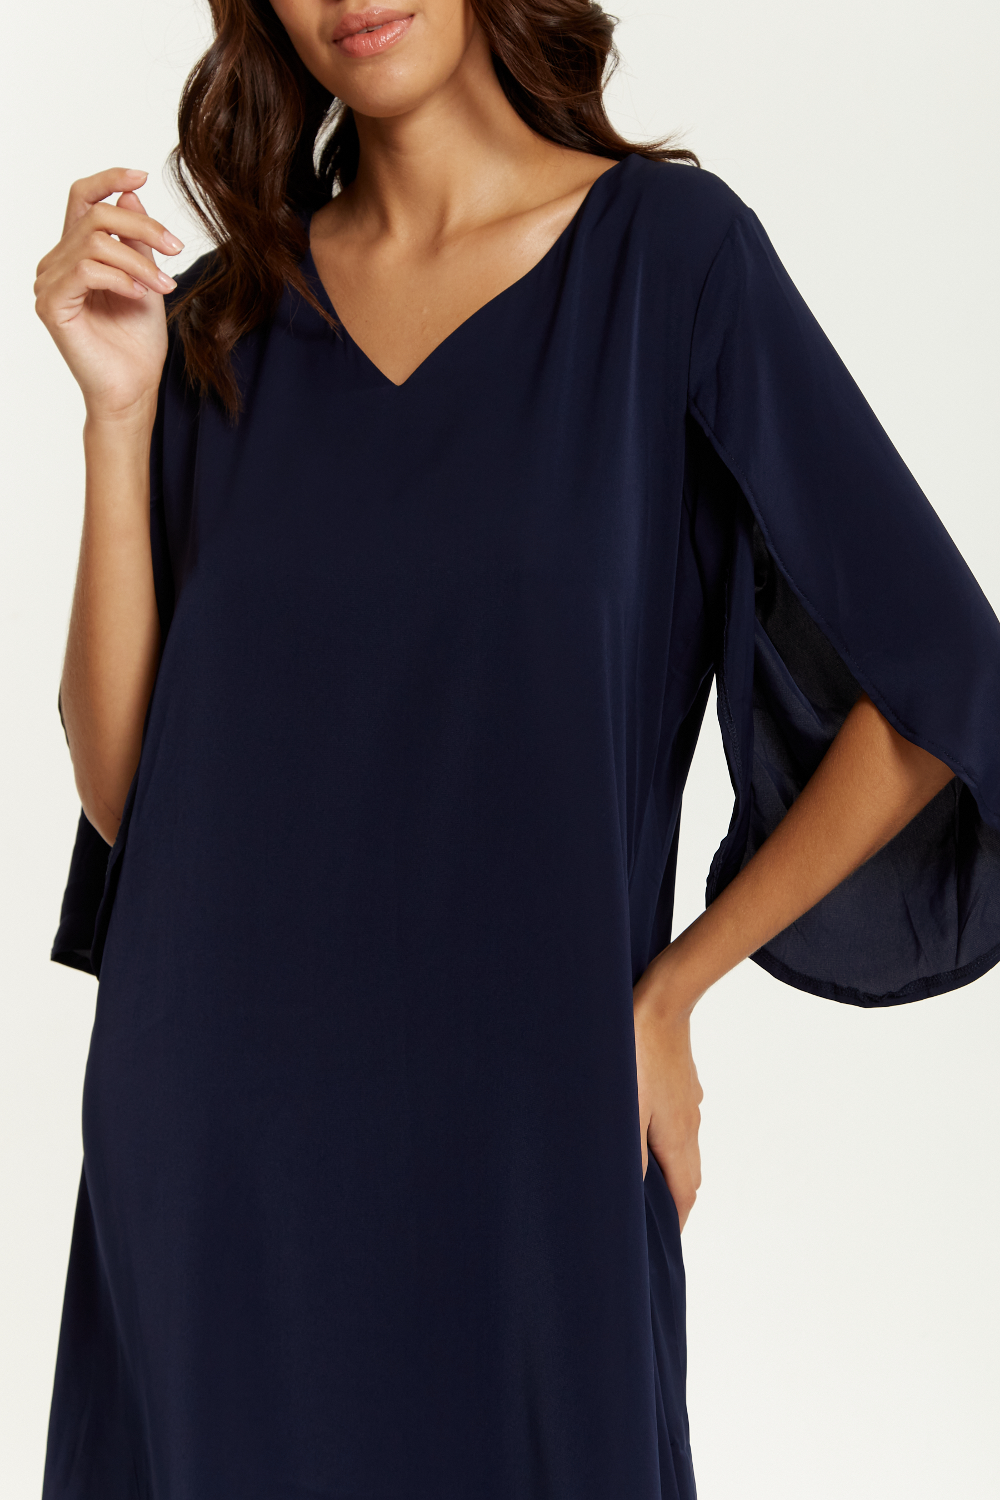 Oversized V Neck Tunic with Split Sleeves in Navy GLR FASHION NETWORKING